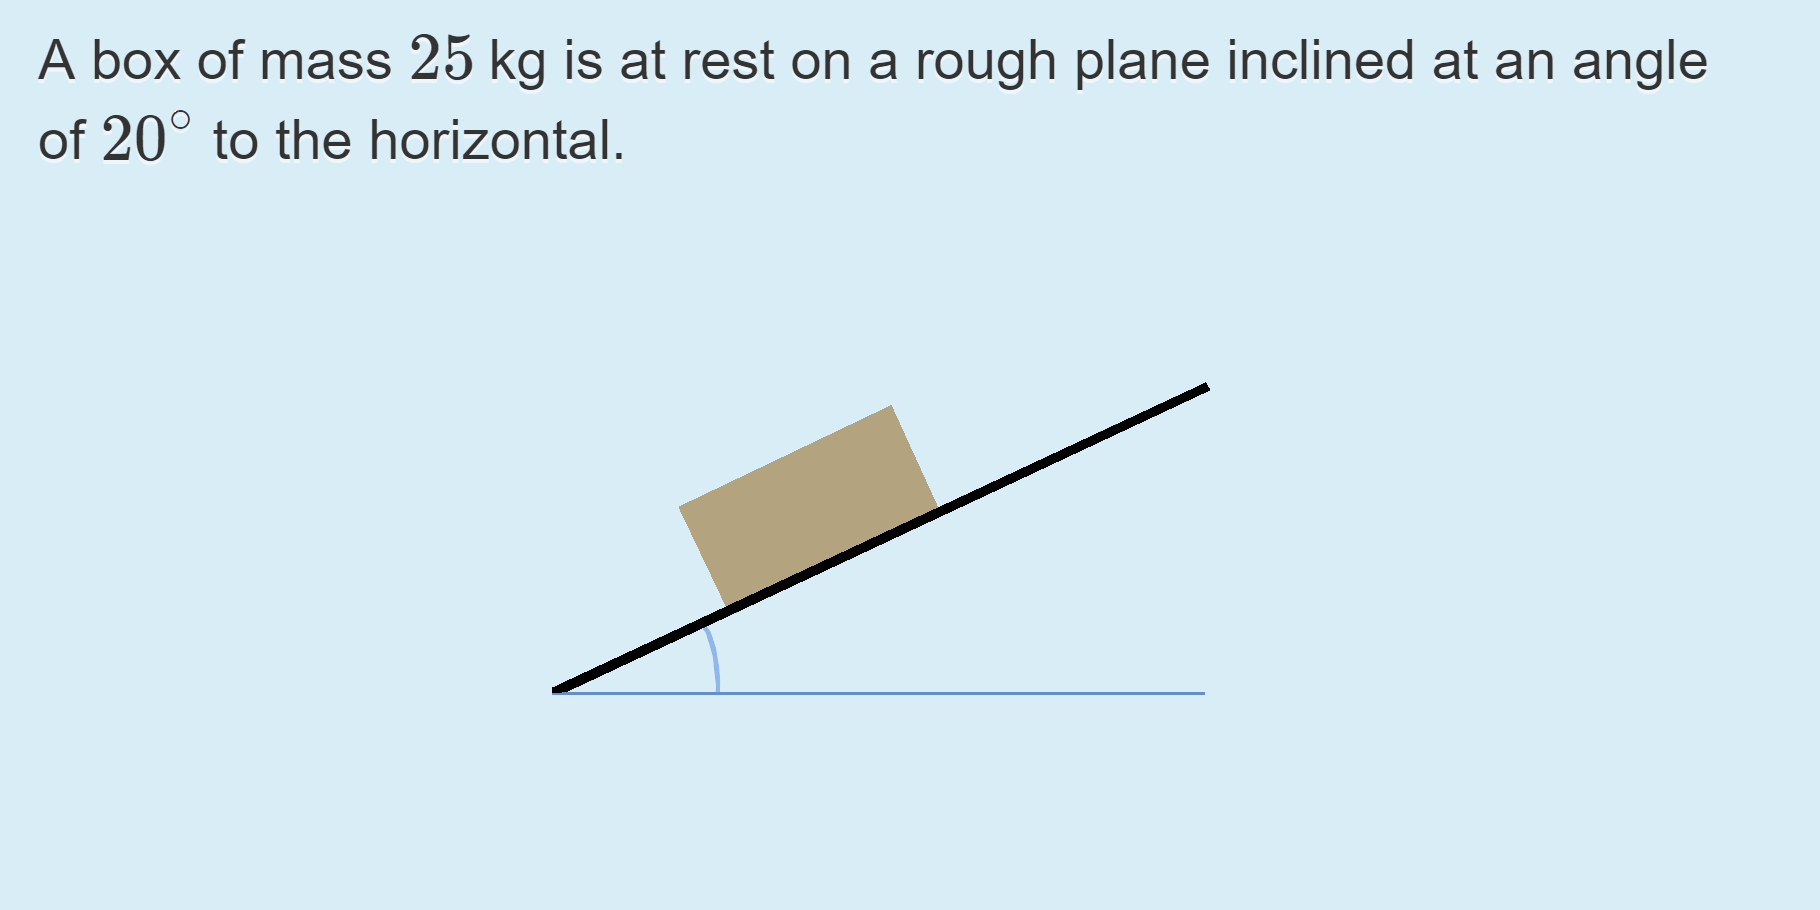 A STACK question on finding the magnitude of friction force on a box resting on an incline.